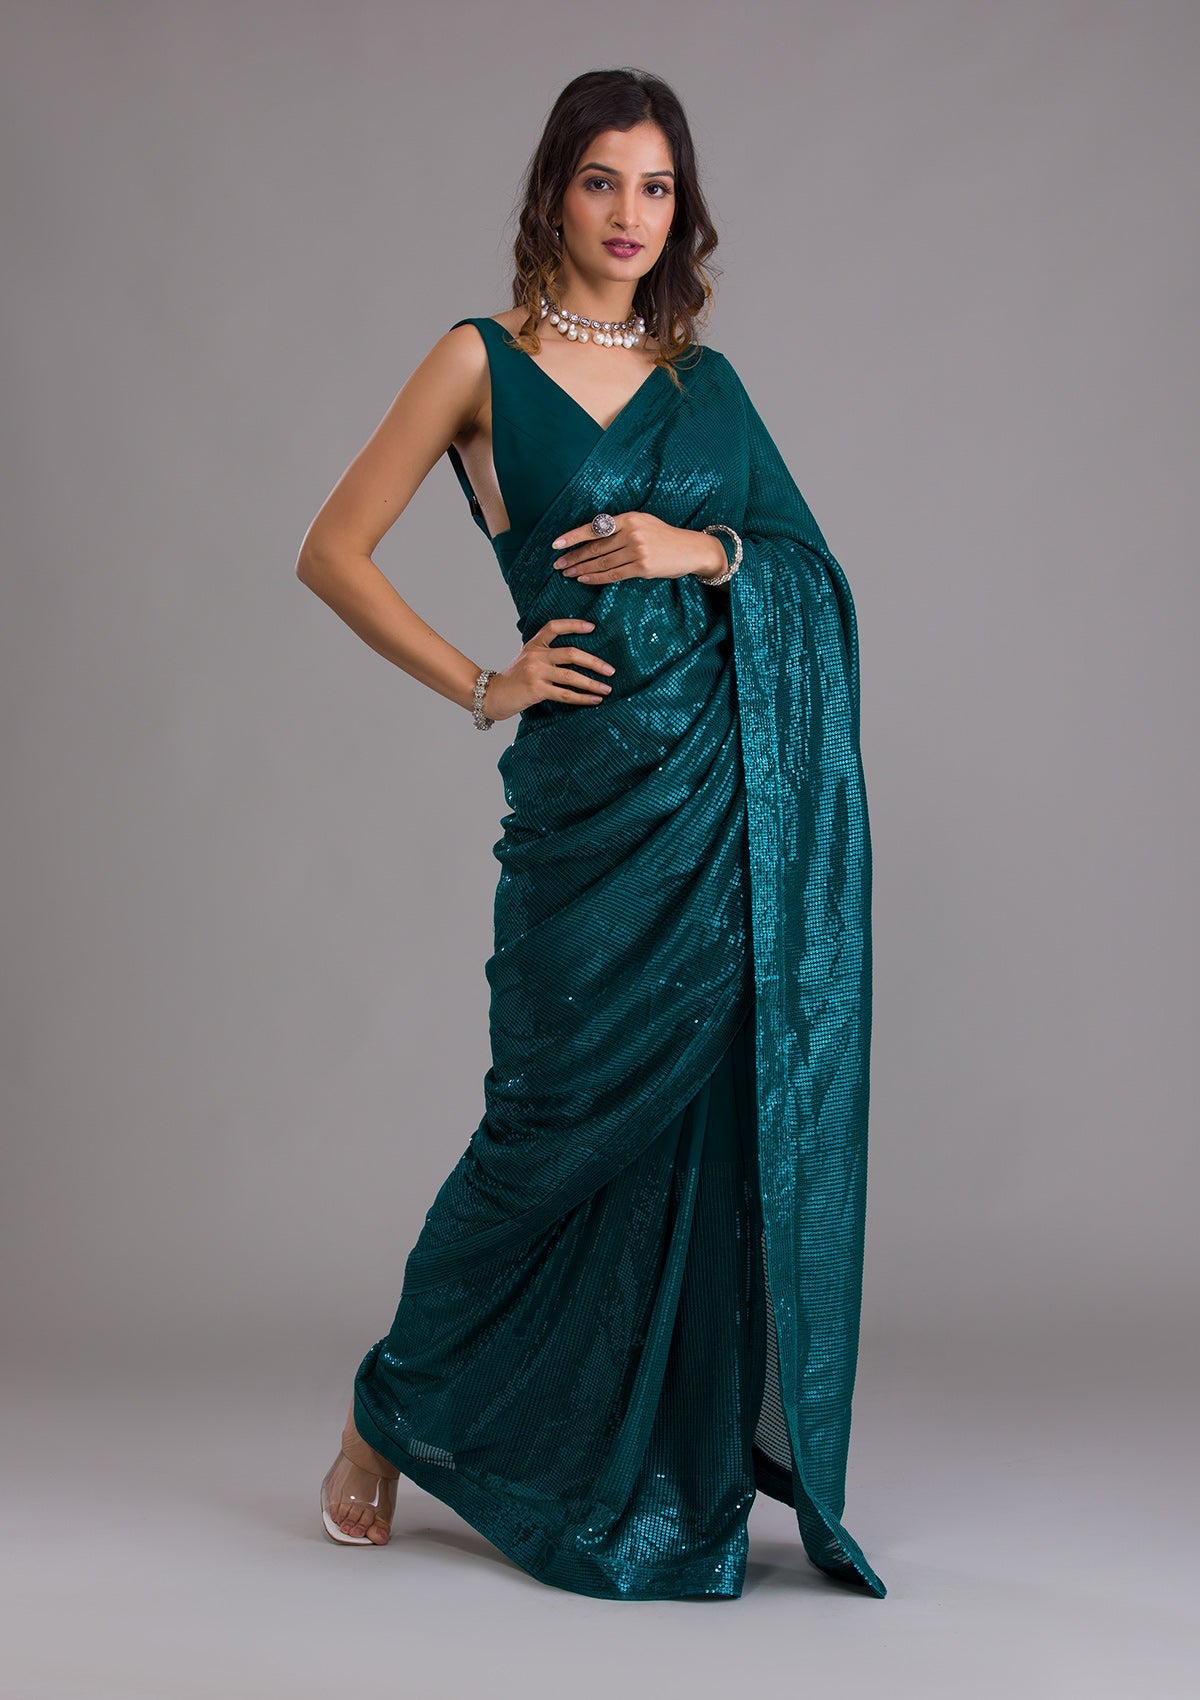 Get Perfect Fit with Prisma Saree Shaper in Rama Green